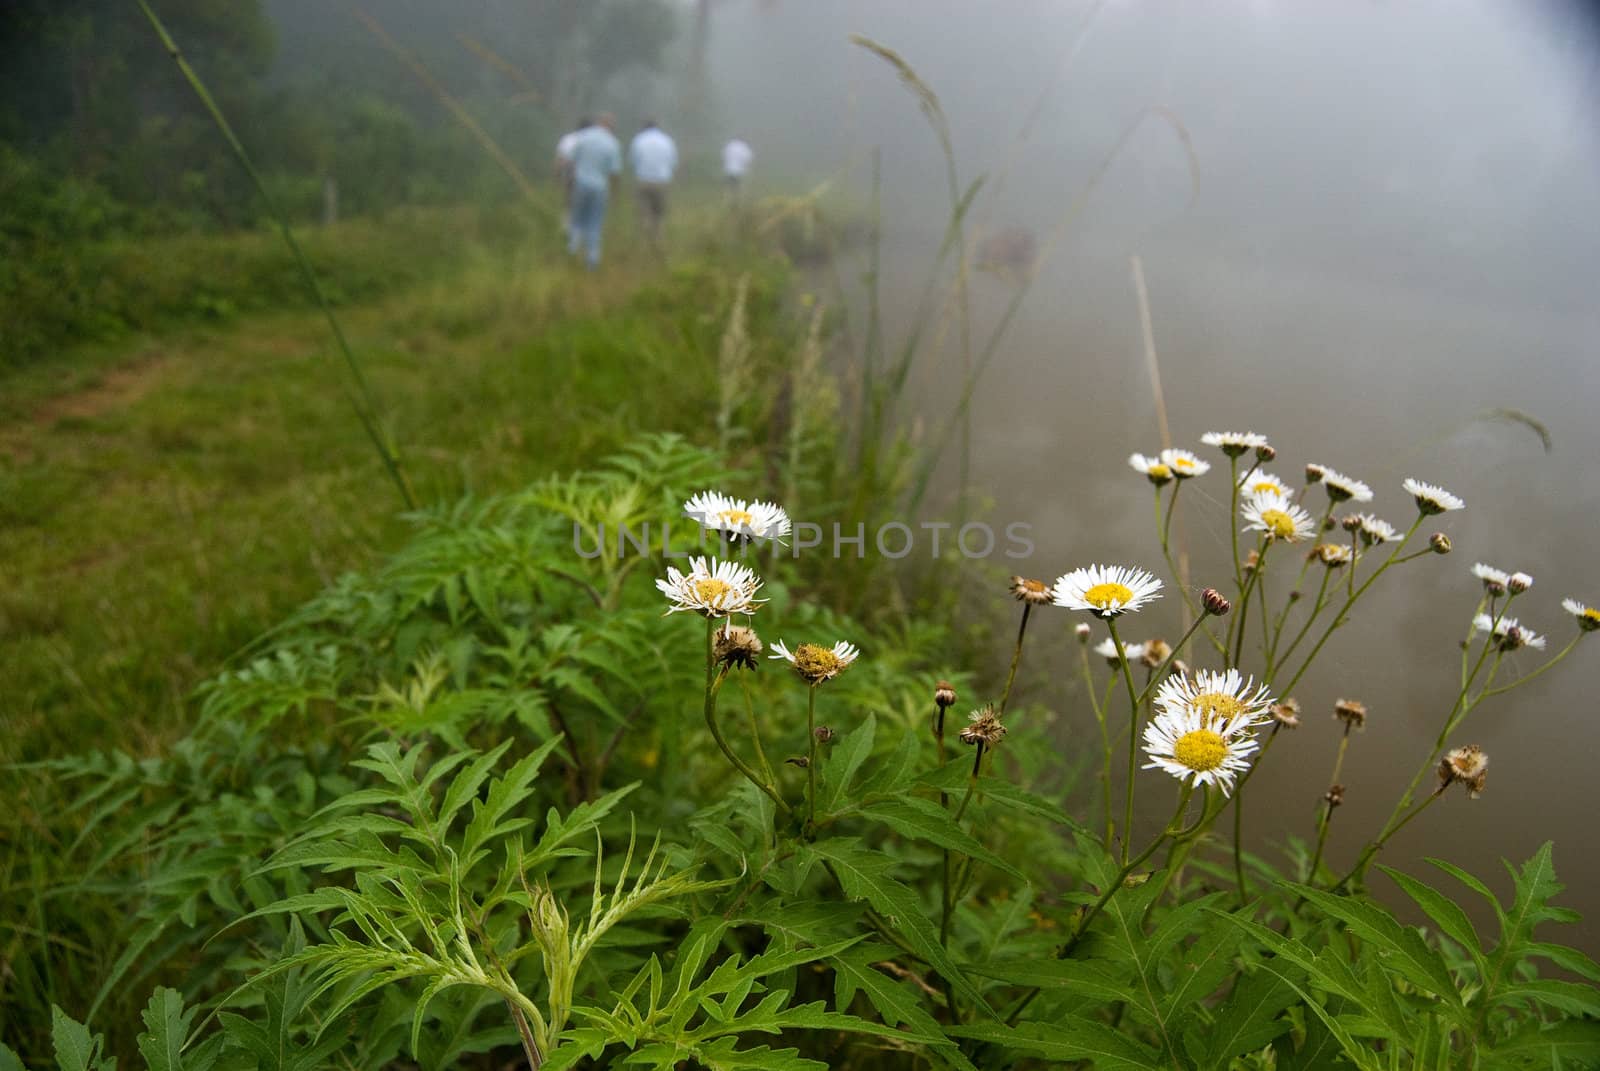 Rural road with people, flowers, lake and mist.